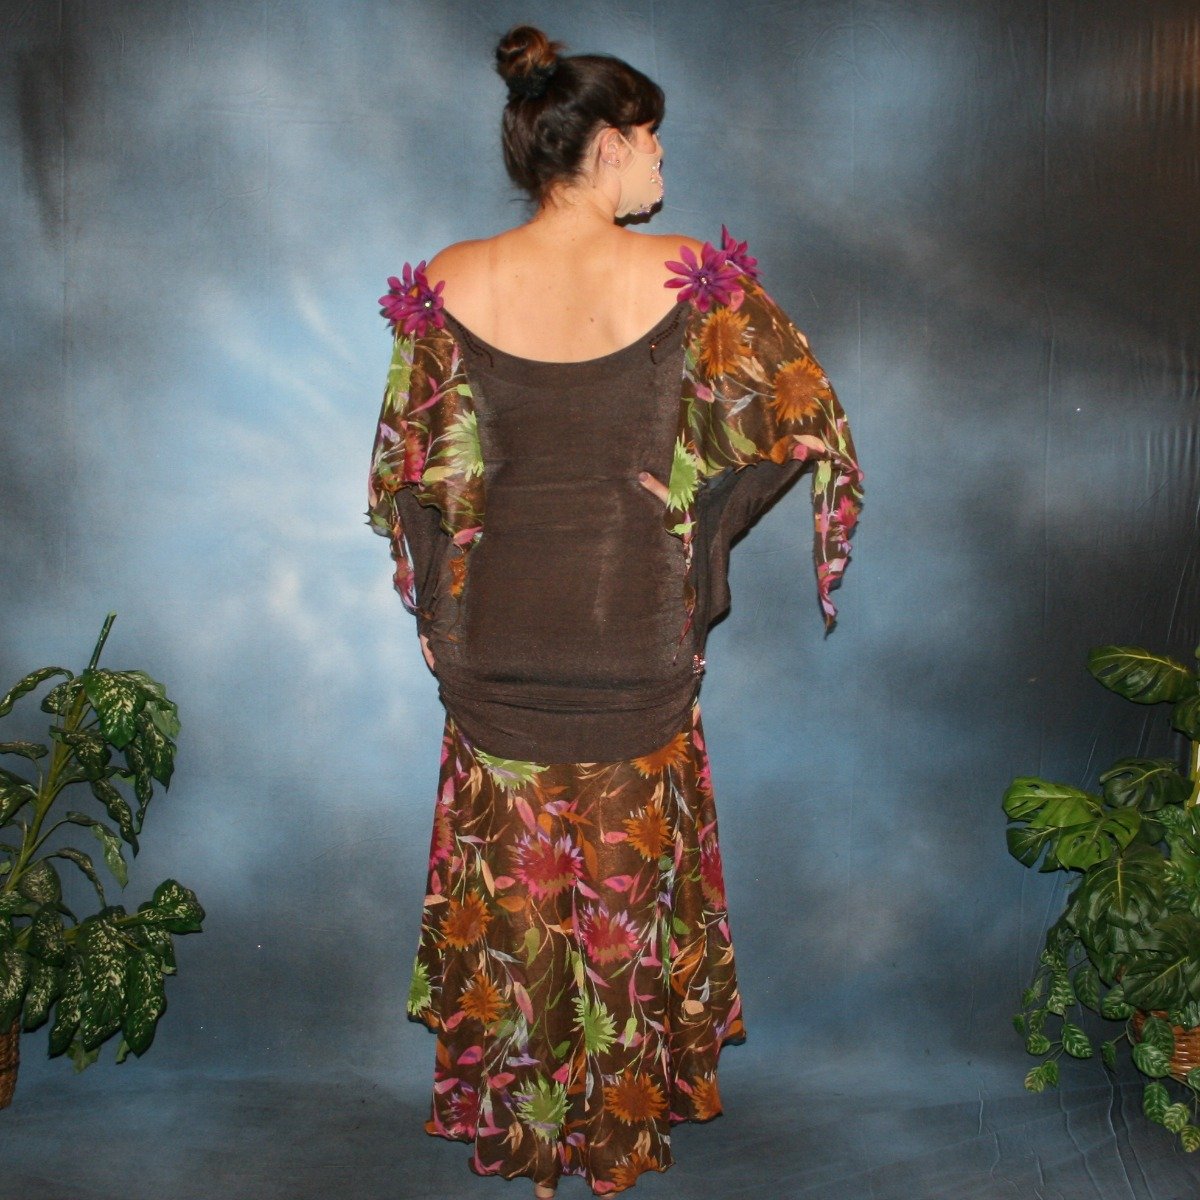 Crystal's Creations back view of brown ballroom dress created of luxurious chocolate brown slinky along with fall flowers print chiffon